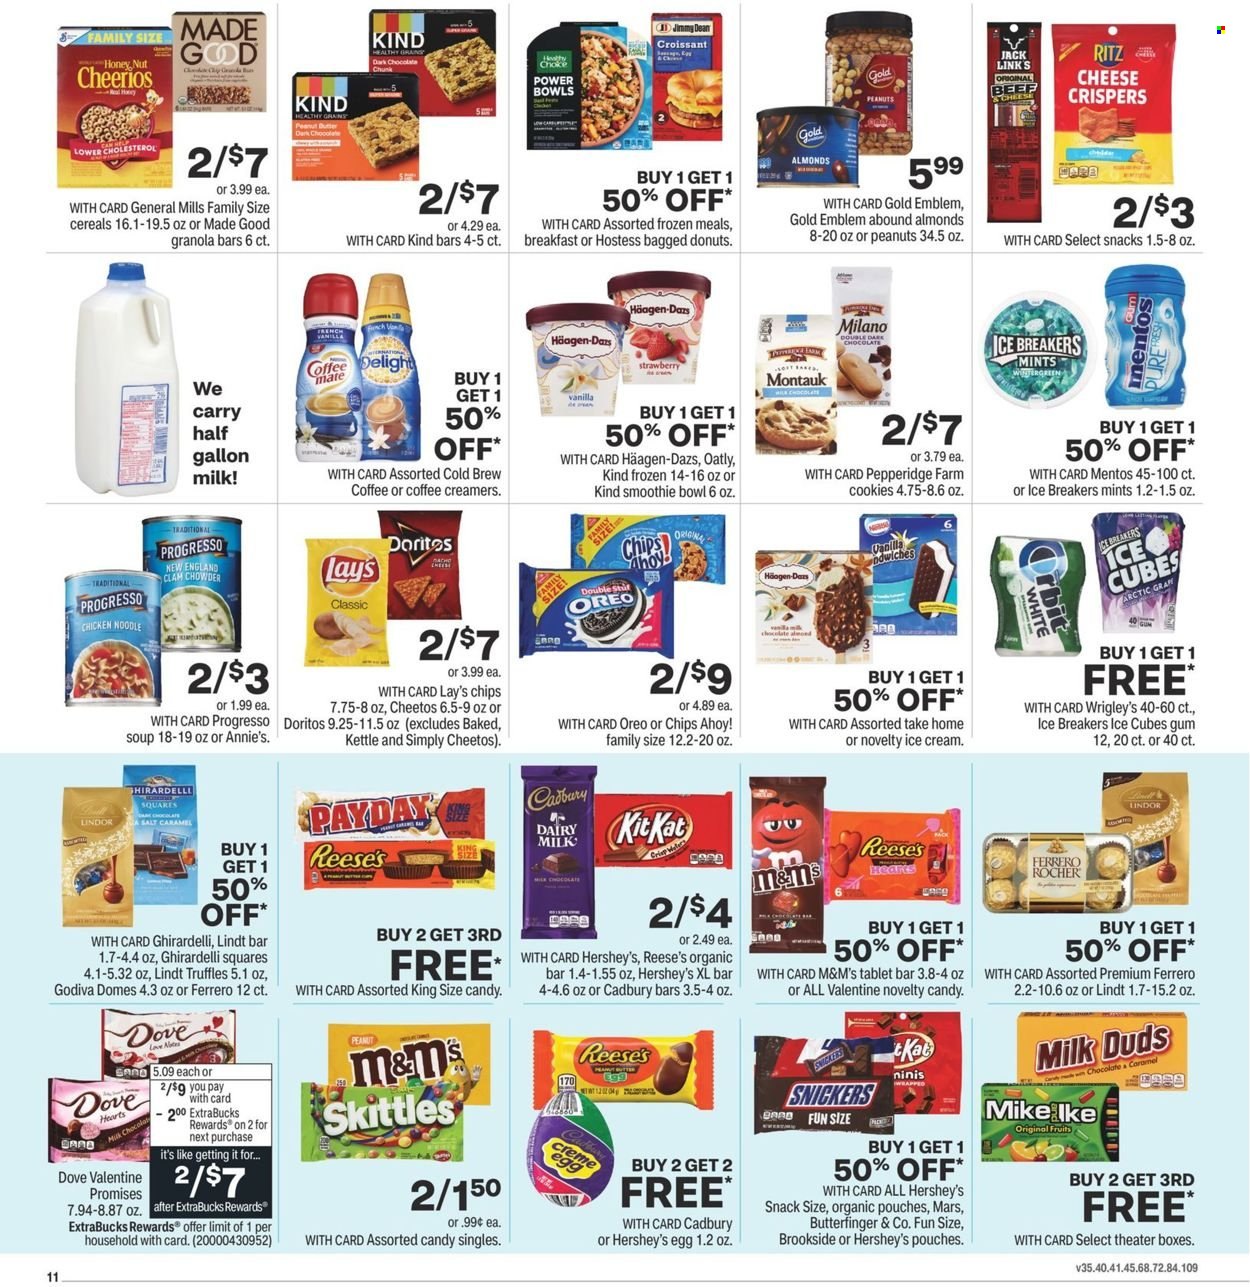 thumbnail - CVS Pharmacy Flyer - 01/16/2022 - 01/22/2022 - Sales products - soup, noodles, Progresso, Annie's, ice cream, Reese's, Hershey's, Häagen-Dazs, cookies, snack, ice cubes gum, Mentos, Milk Duds, Lindt, Lindor, Ferrero Rocher, Snickers, Mars, truffles, M&M's, donut, Godiva, Cadbury, Dairy Milk, Skittles, Chips Ahoy!, Ghirardelli, RITZ, Doritos, Cheetos, Lay’s, clam chowder, Cheerios, granola bar, almonds, peanuts, coffee, Dove. Page 11.